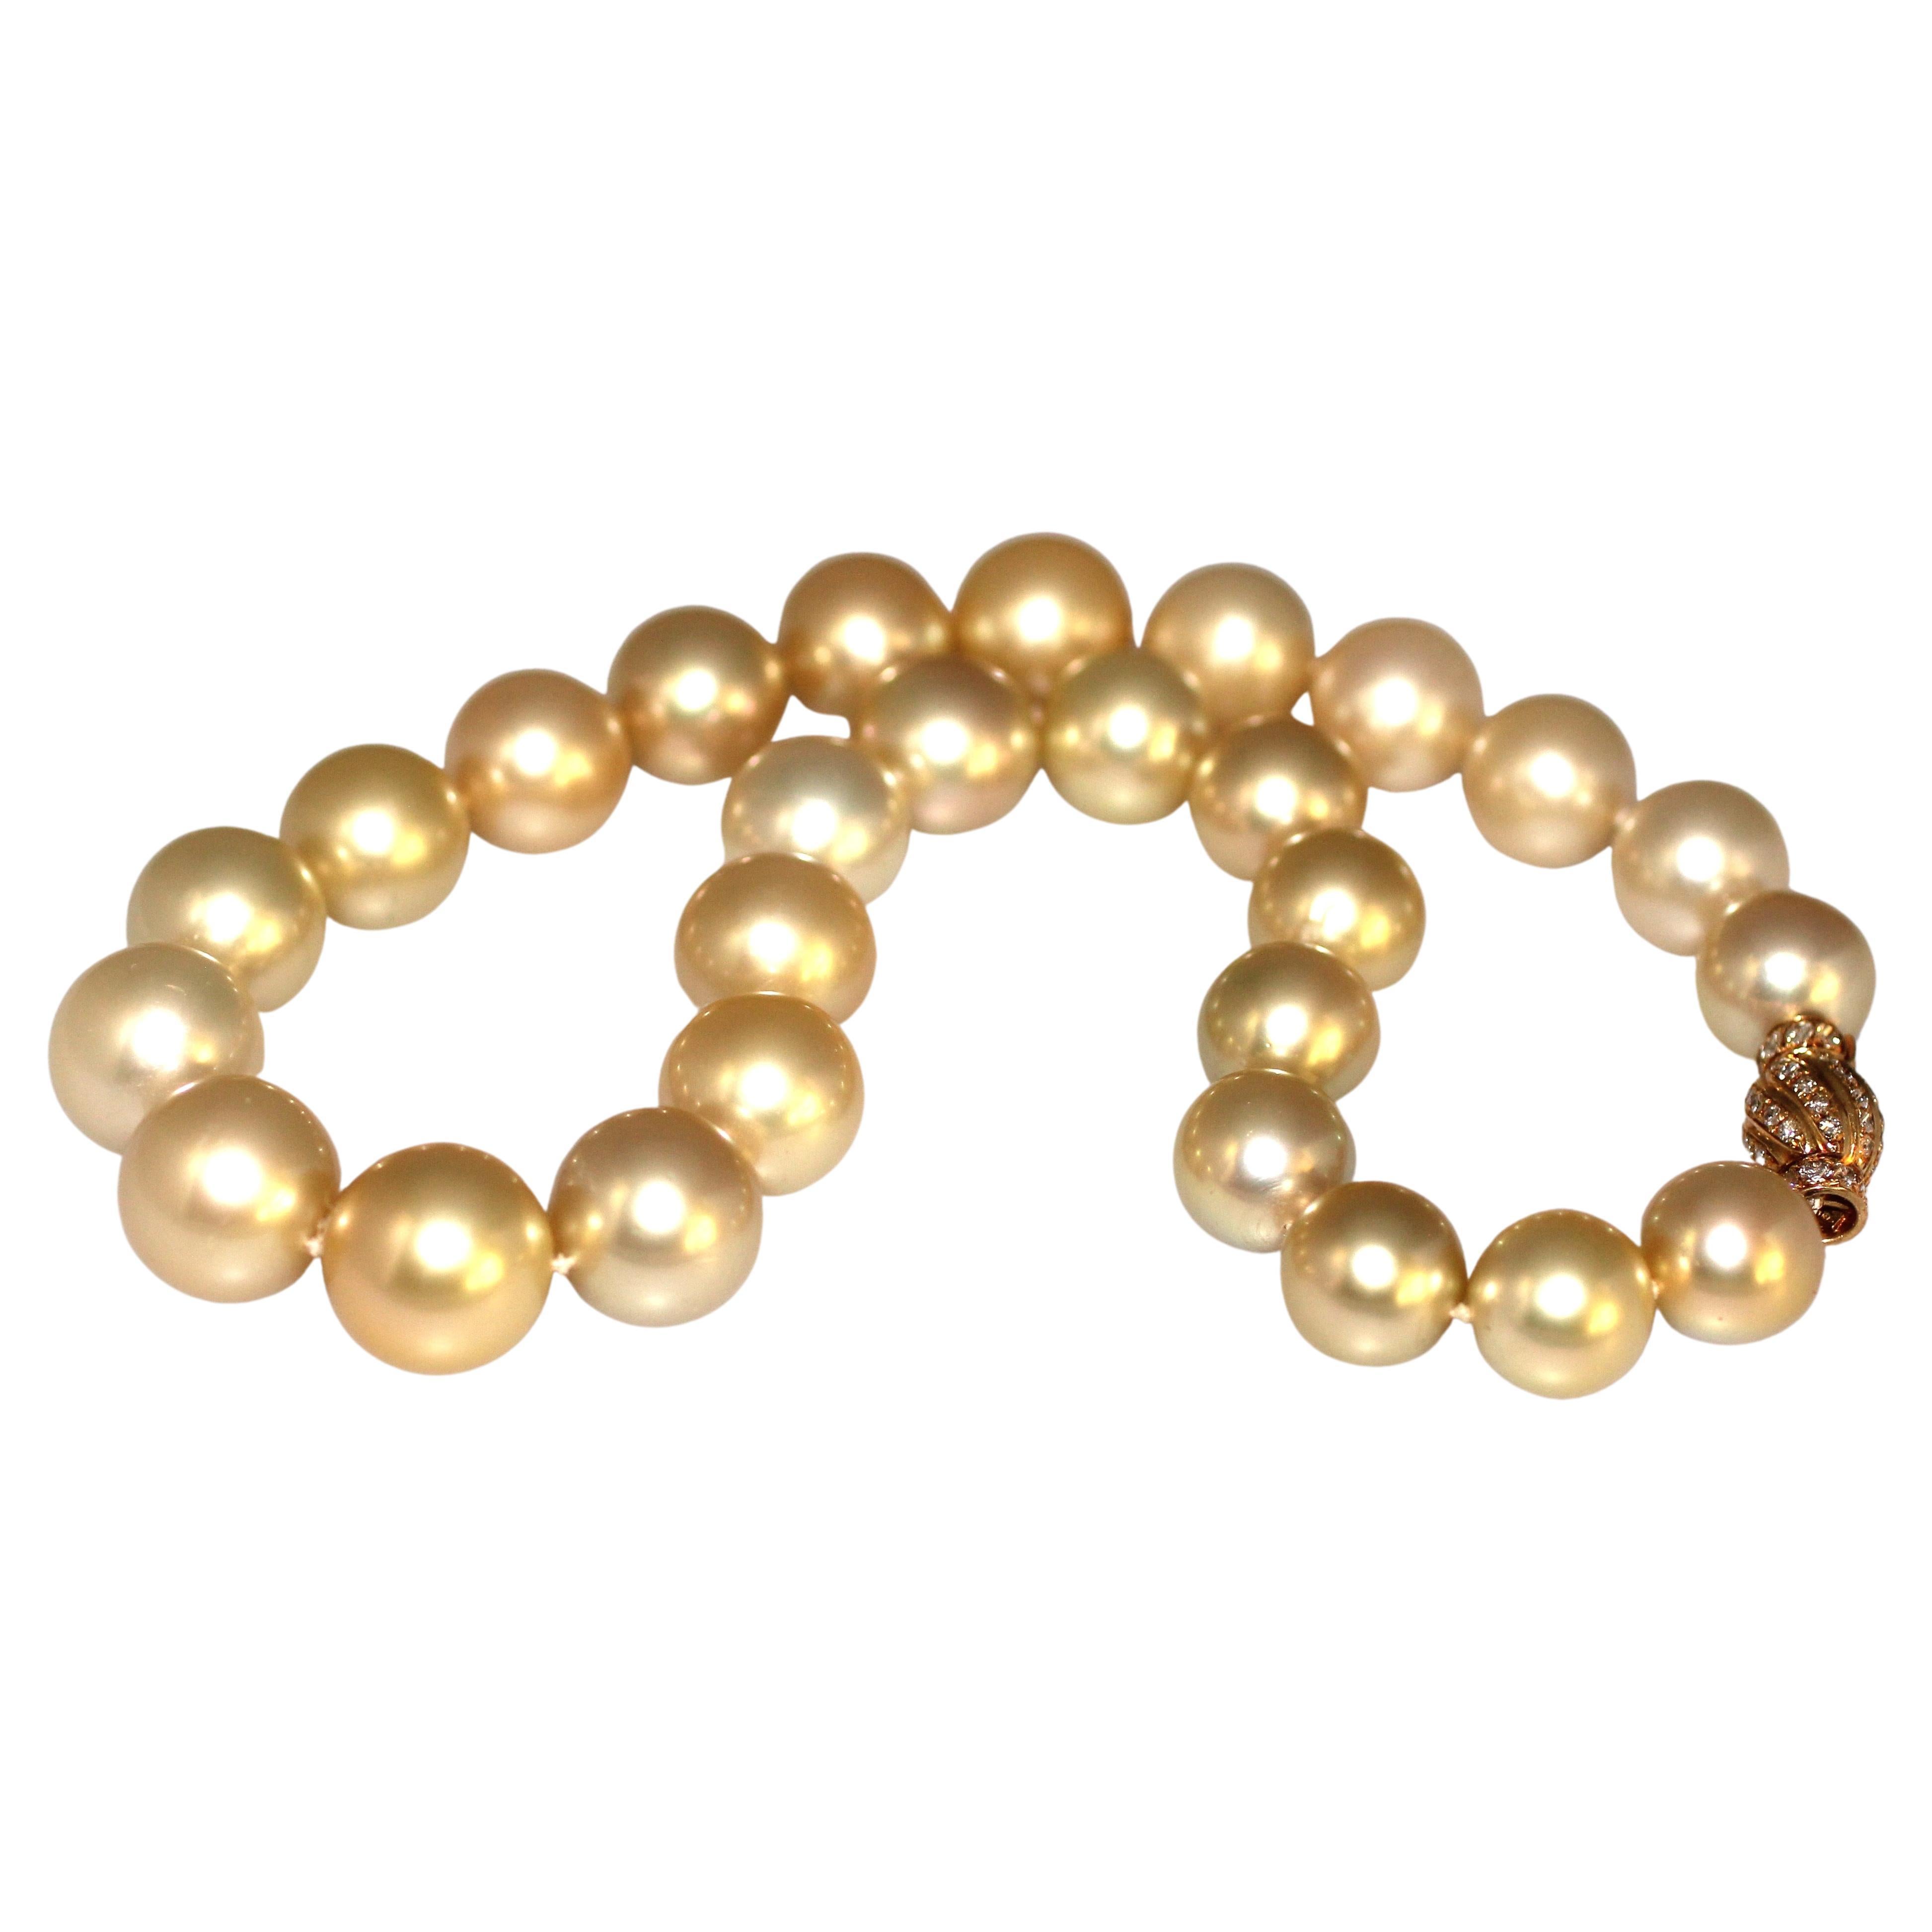 Hakimoto 16x13mm Natural color Golden South Sea Pearl Necklace 18K Diamond Clasp For Sale